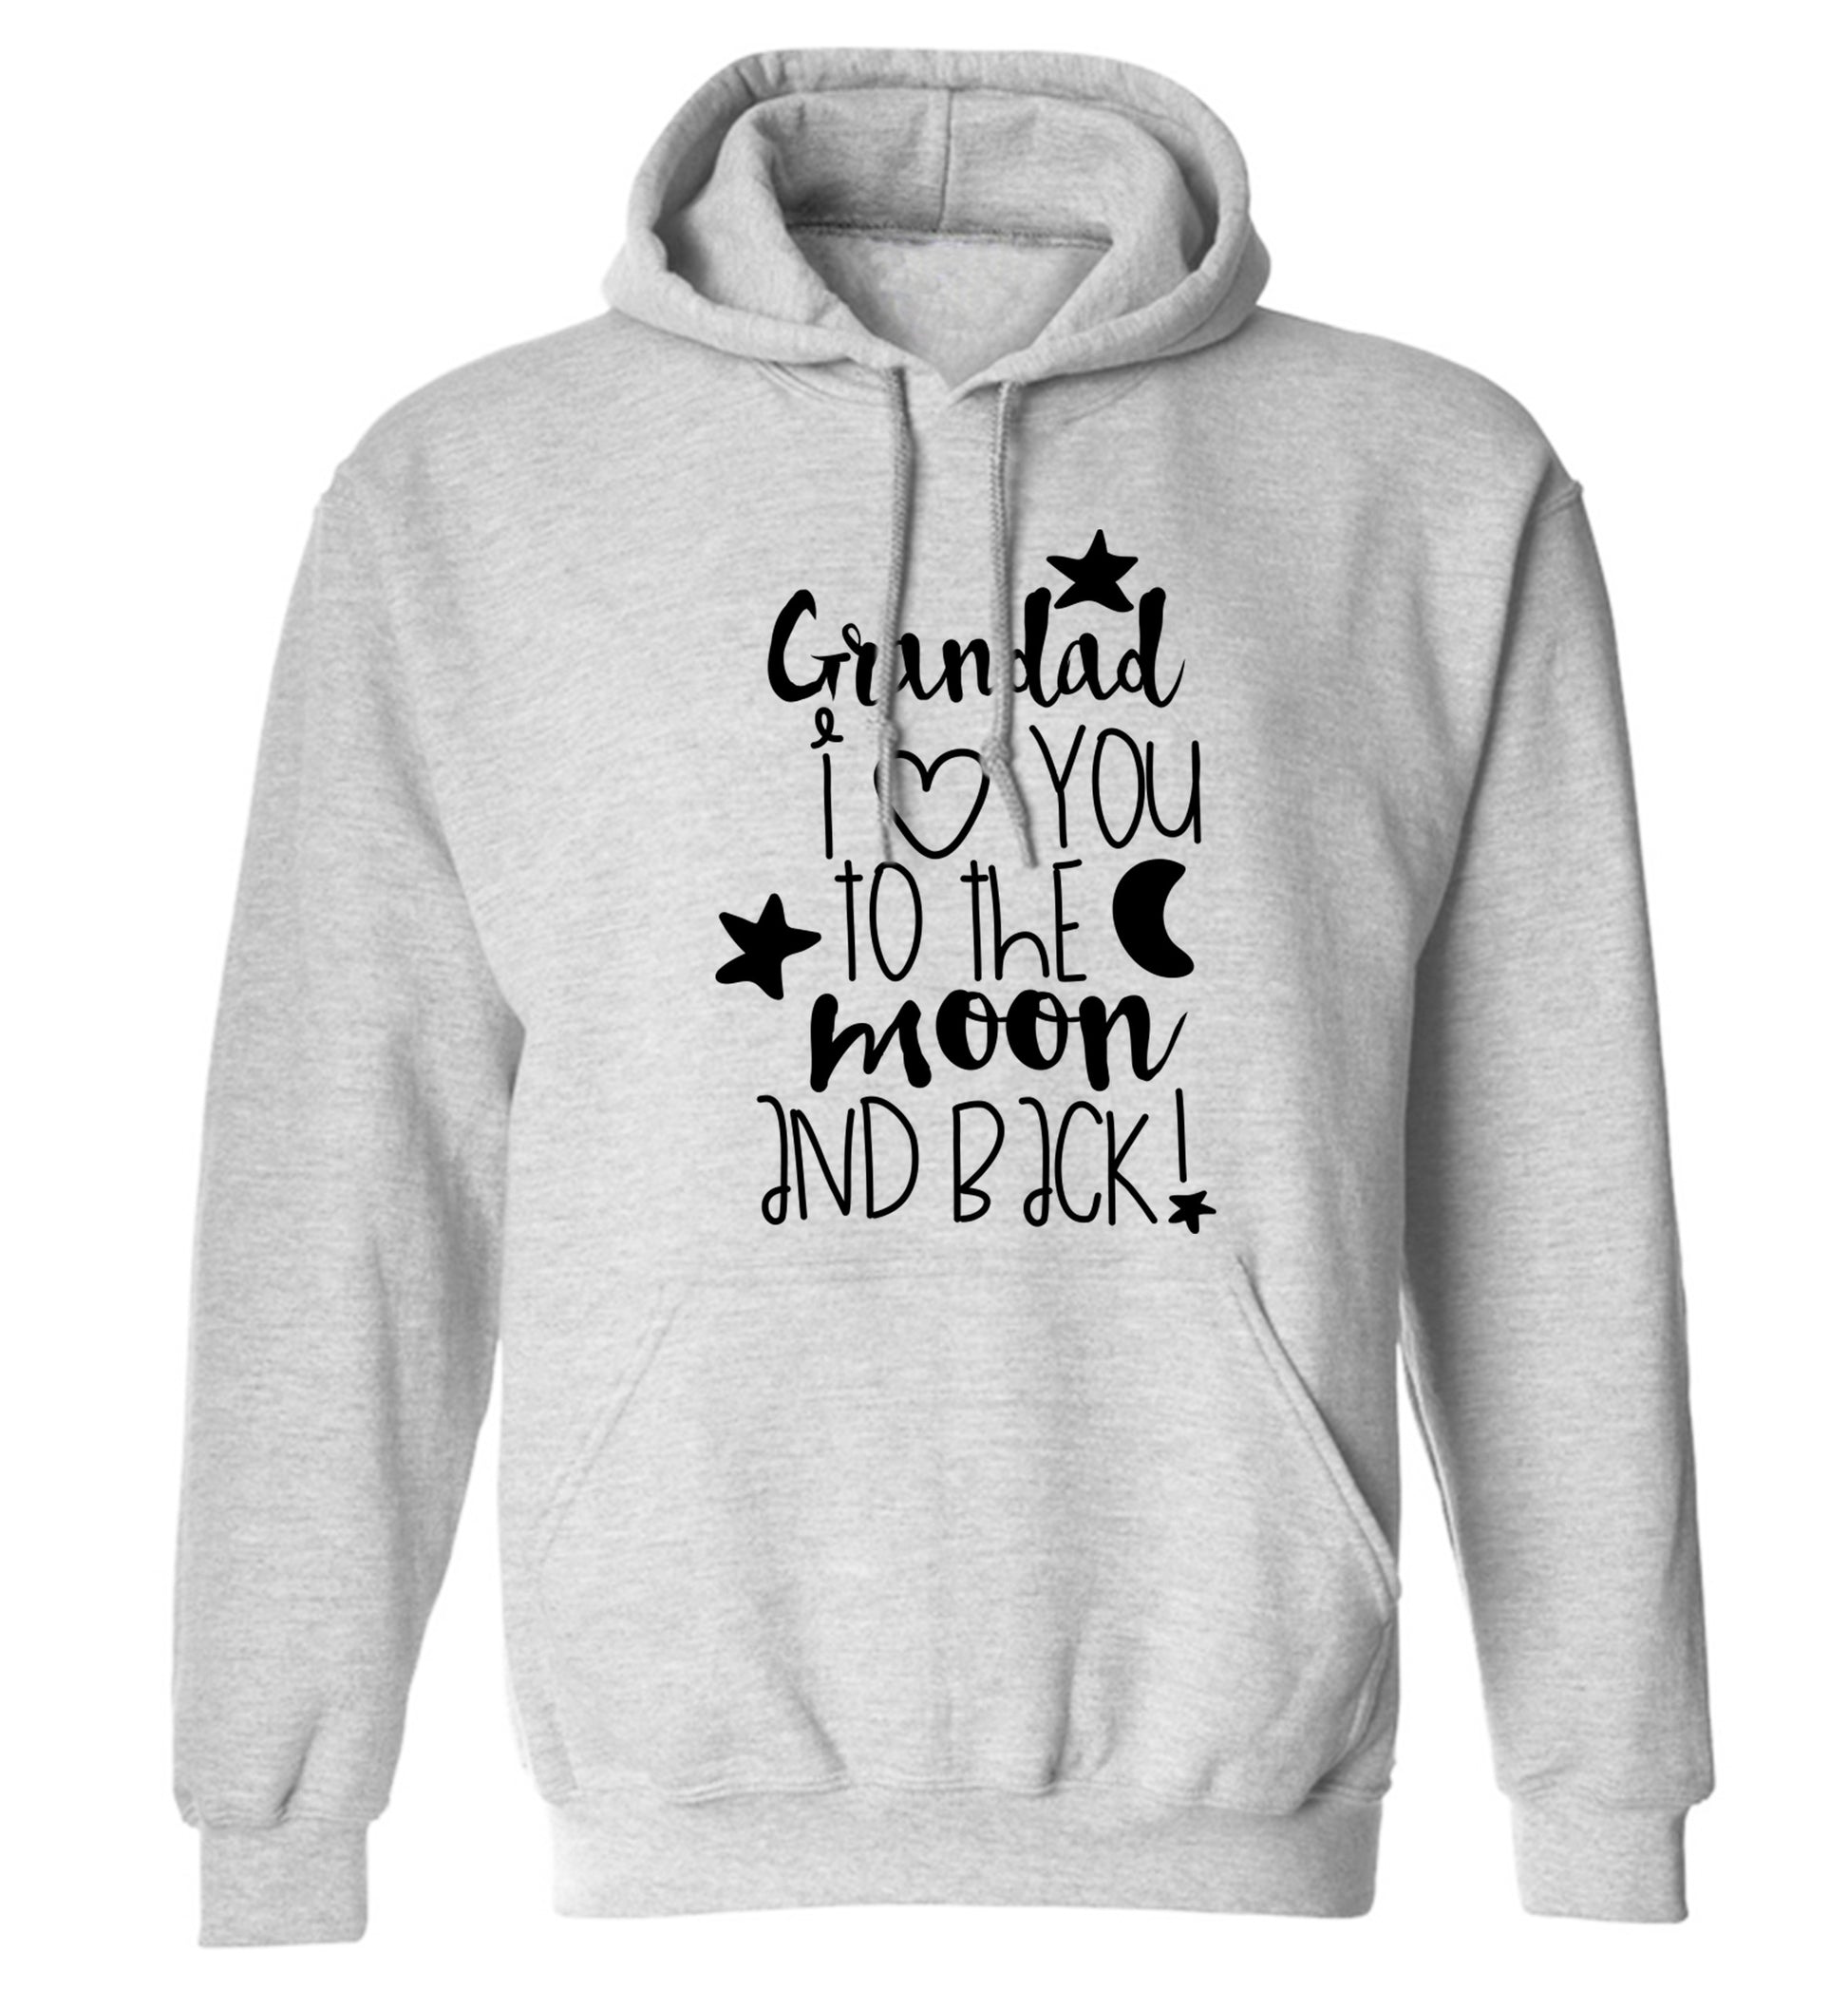 Grandad's I love you to the moon and back adults unisex grey hoodie 2XL